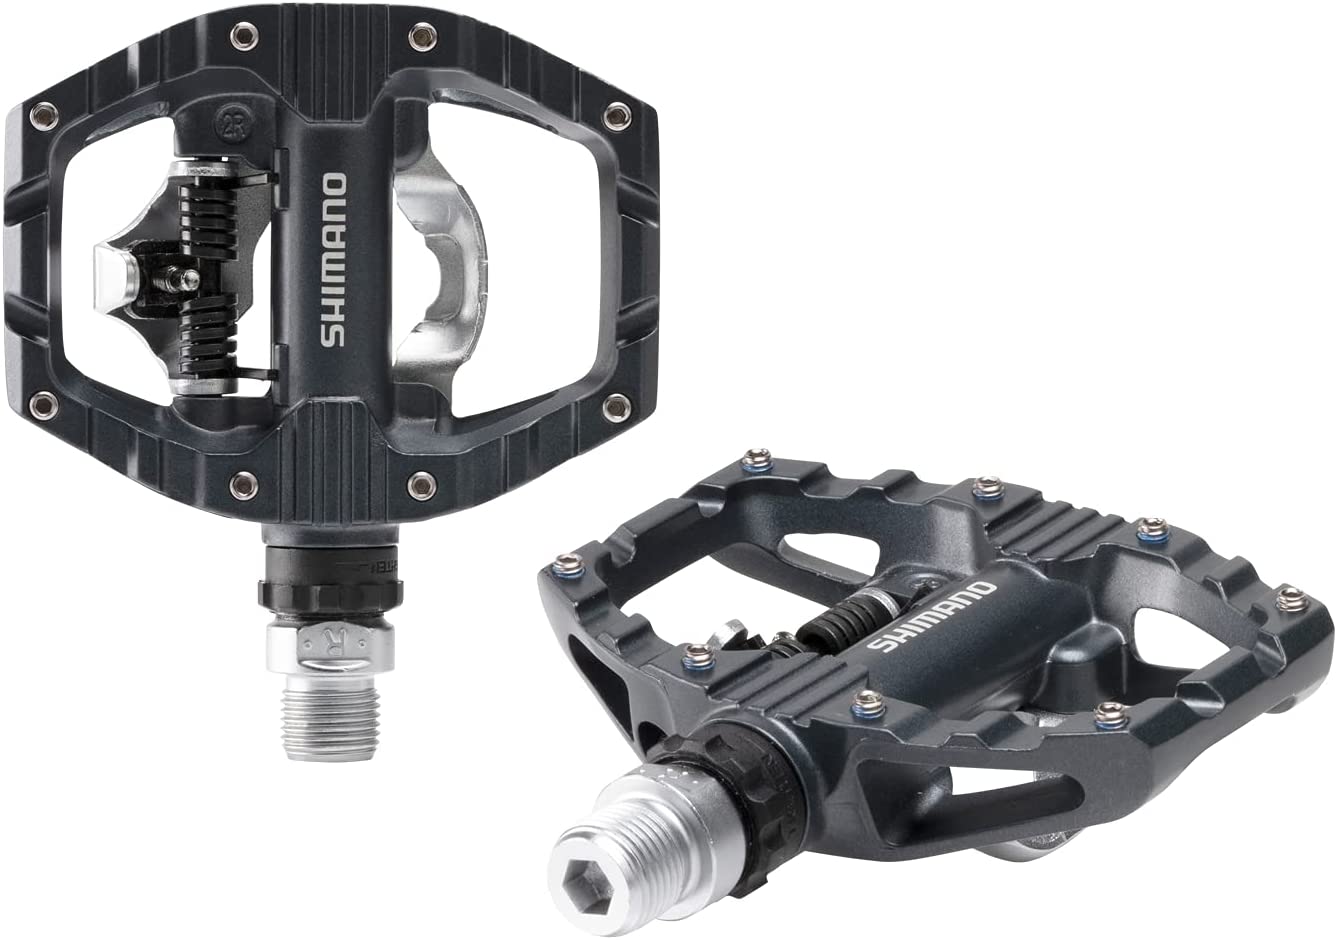 SHIMANO PD-EH500 Adjustable Tension Mountain Bike Pedals